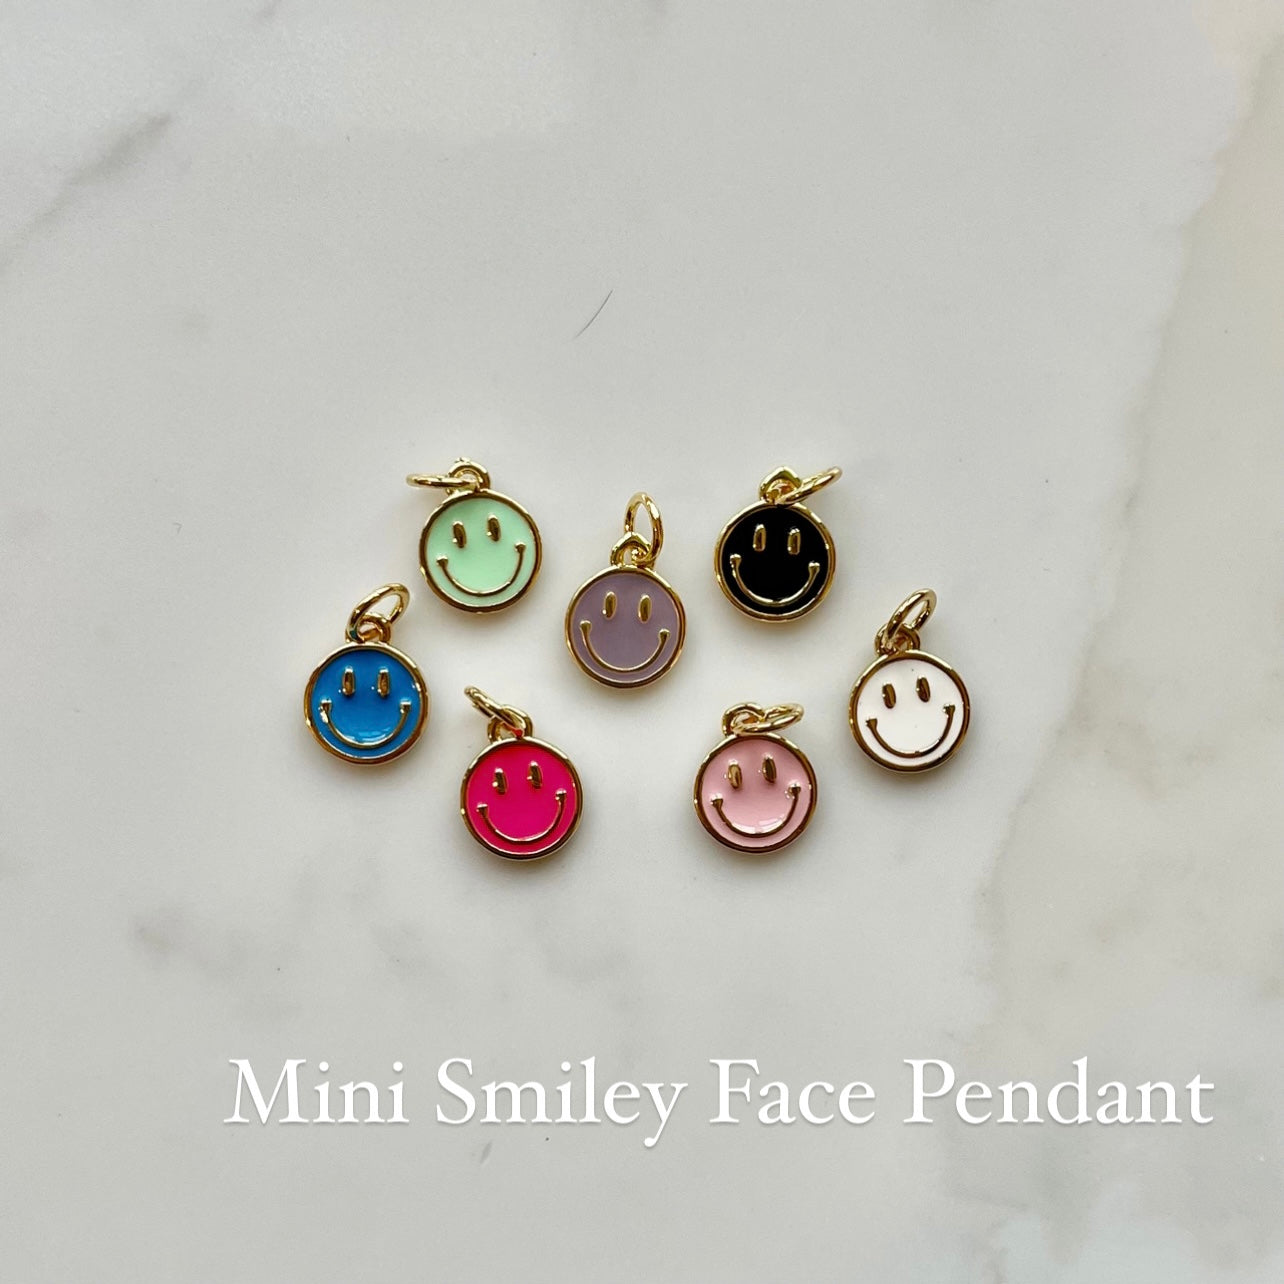 Mini Smiley Face Pendant for the Necklace Kit